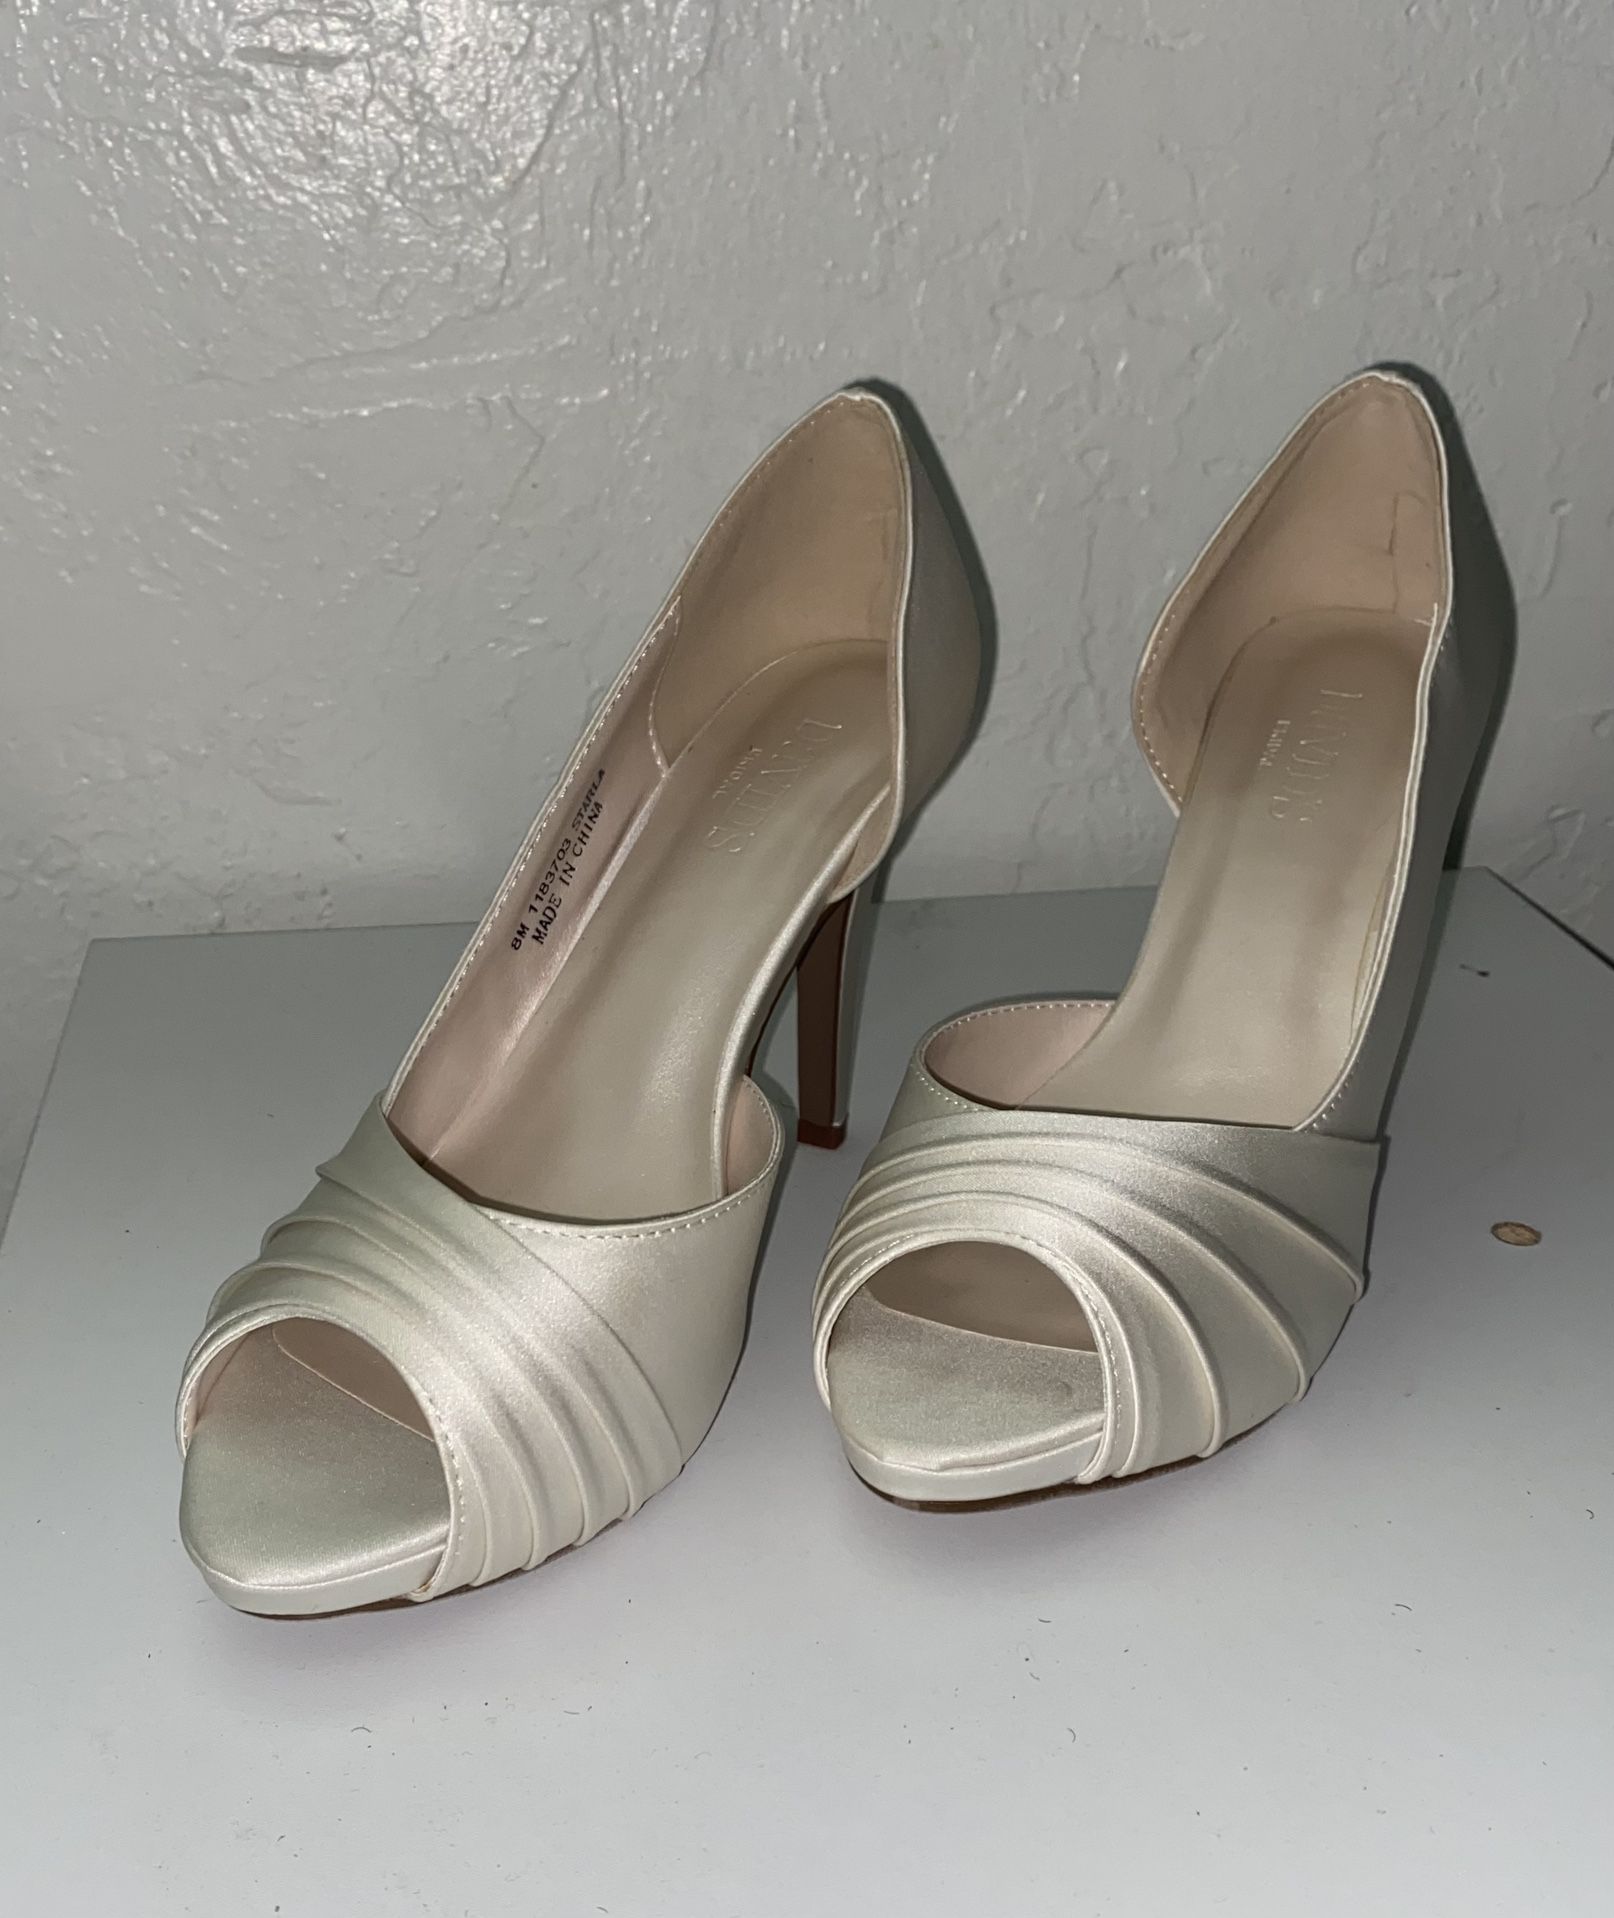 Wedding/Prom Shoes